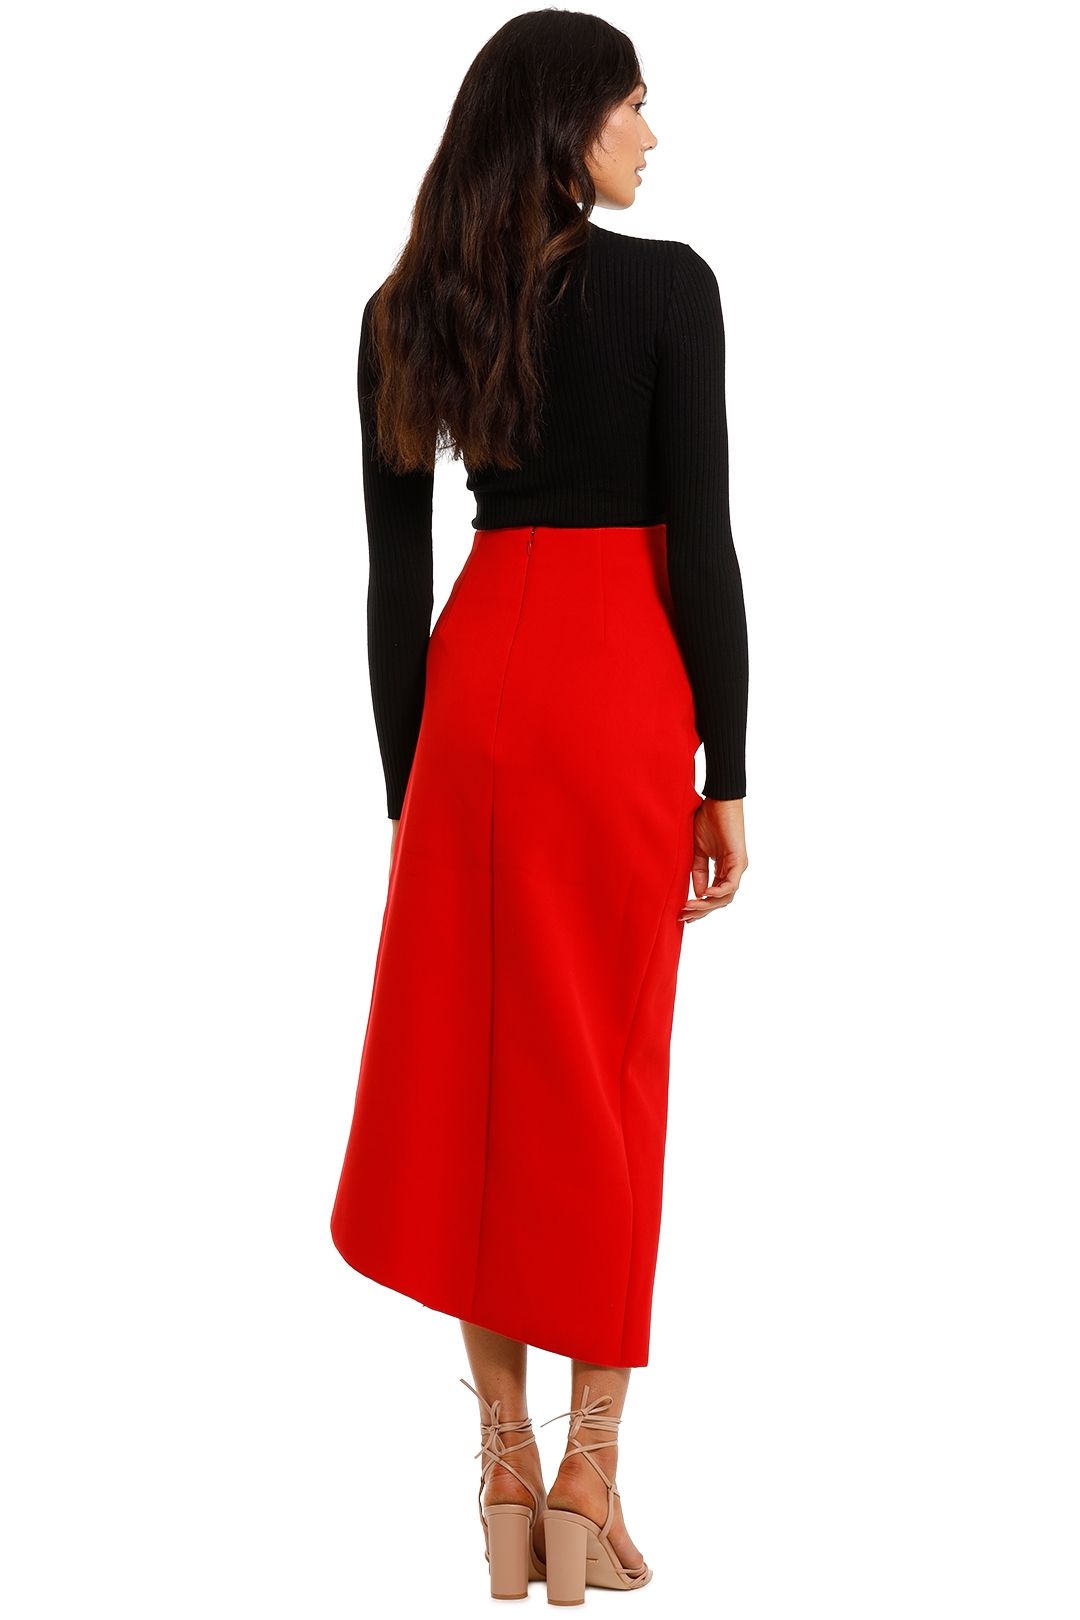 Acler Thistle Skirt Red gathered